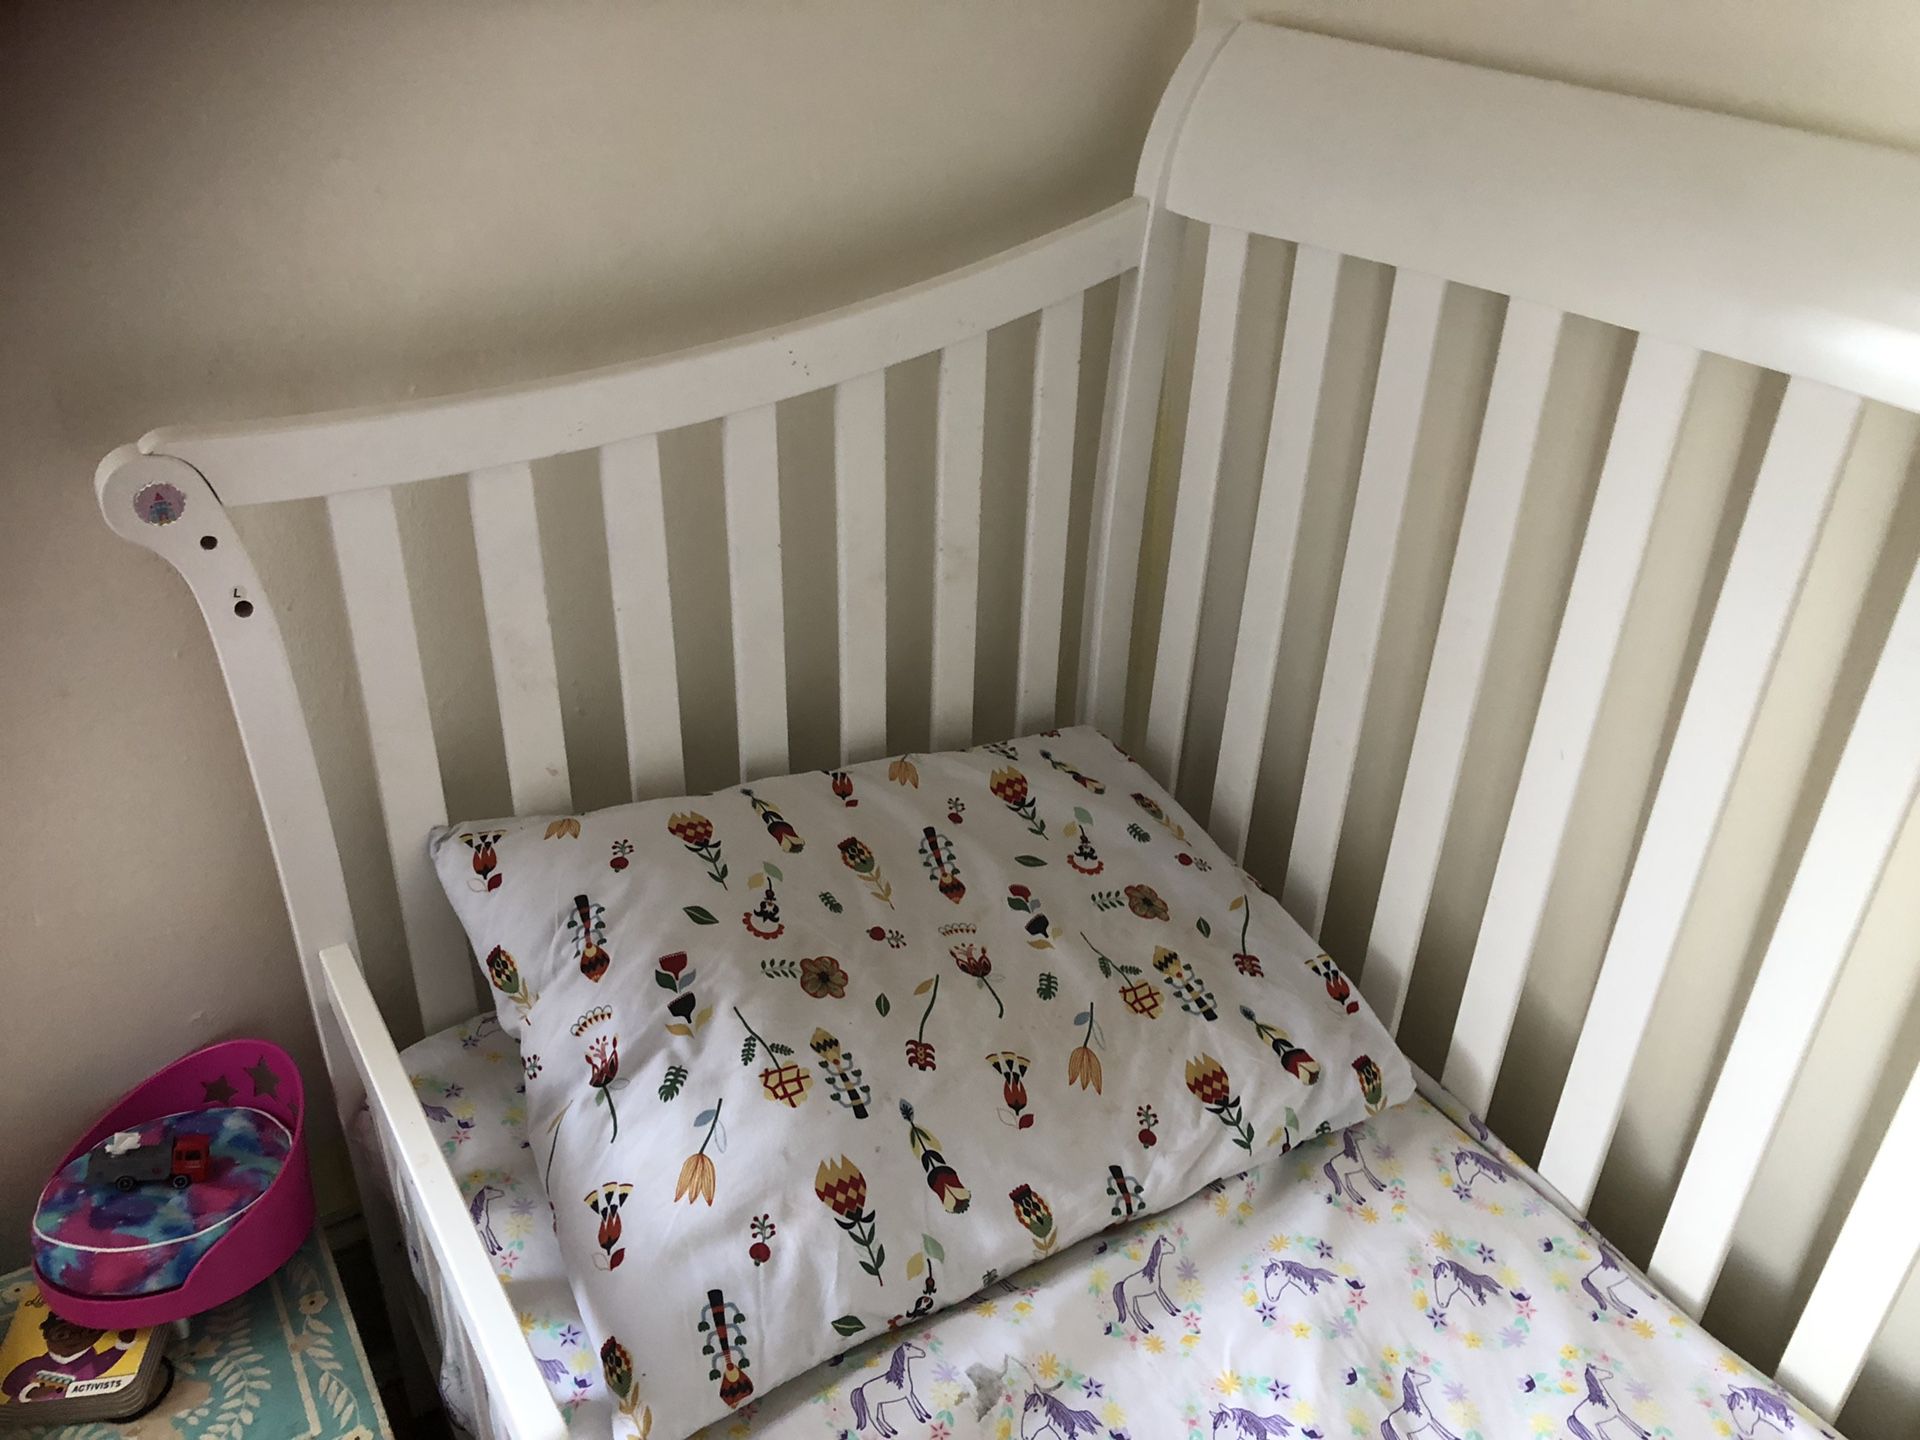 Toddler bed - Good condition